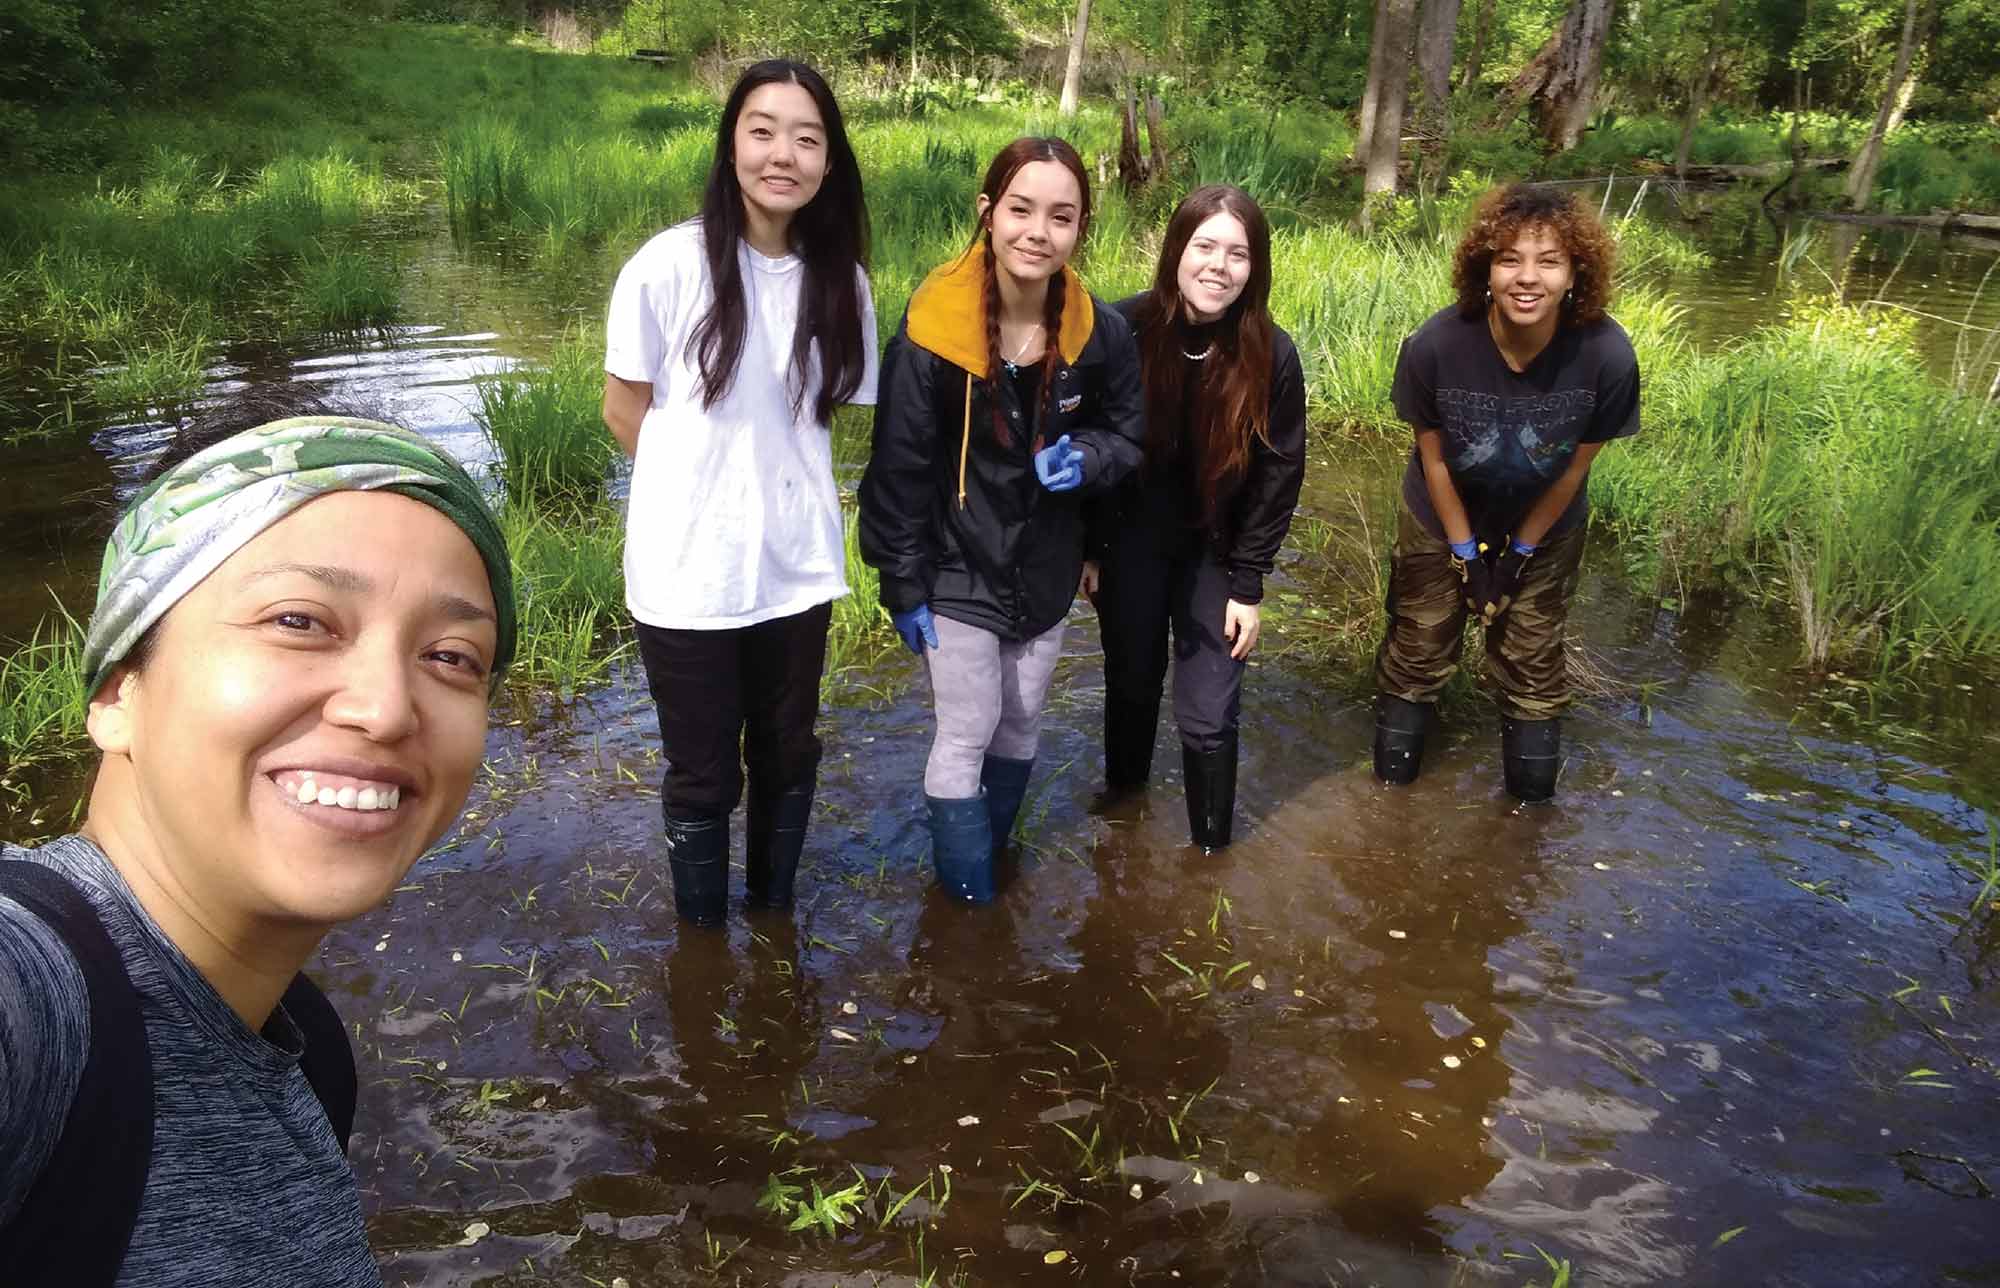 Students in knee-high boots stand in water up to their ankles, conducting research with Associate Professor of biology Itzue Caviedes Solis.